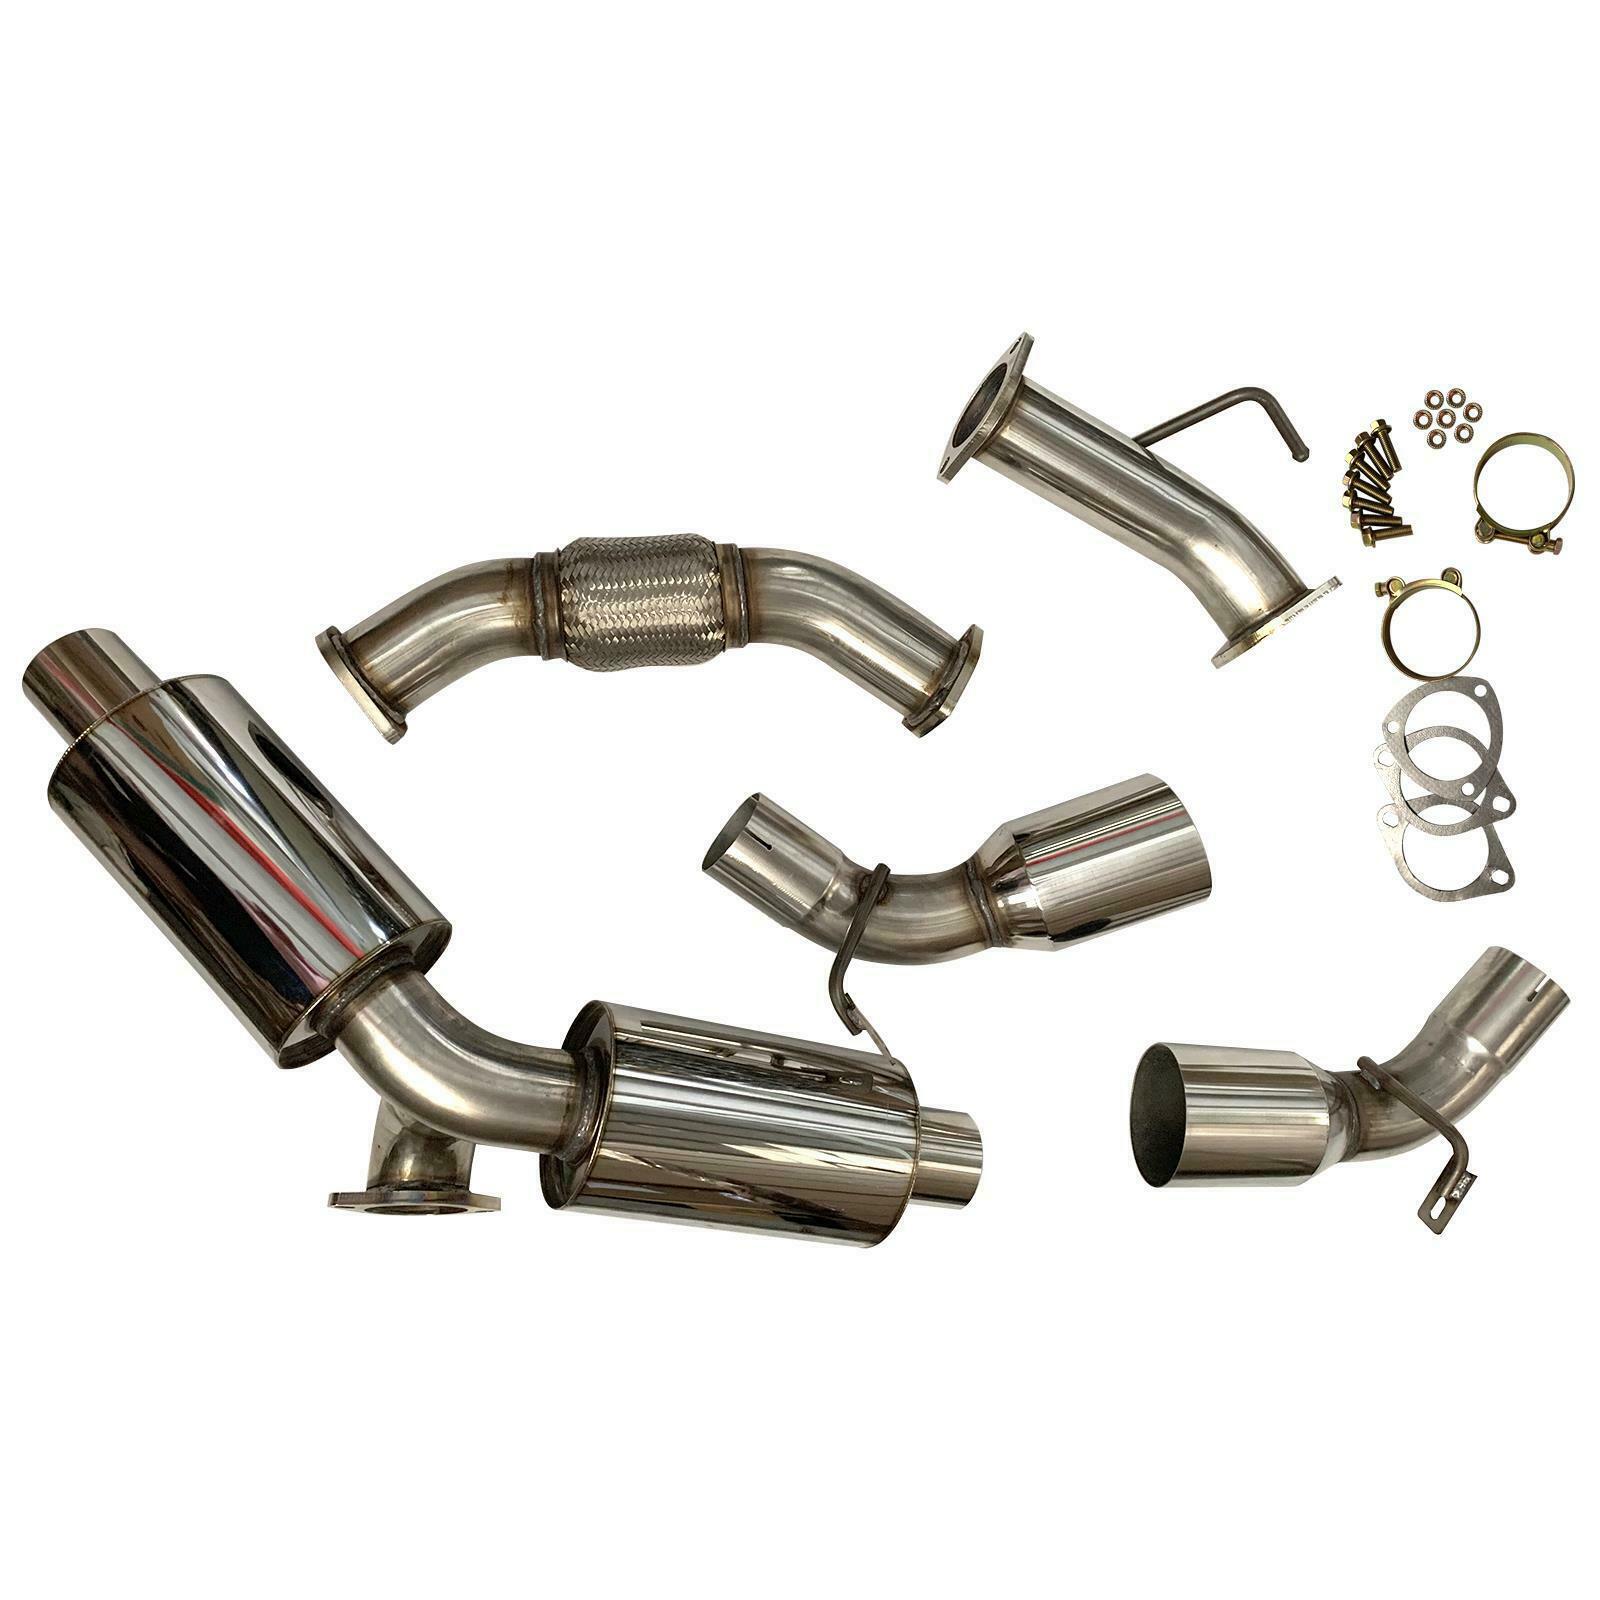 Stainless Dual Muffler Catback Exhaust System For Toyota Mr2 2.0l 1998cc